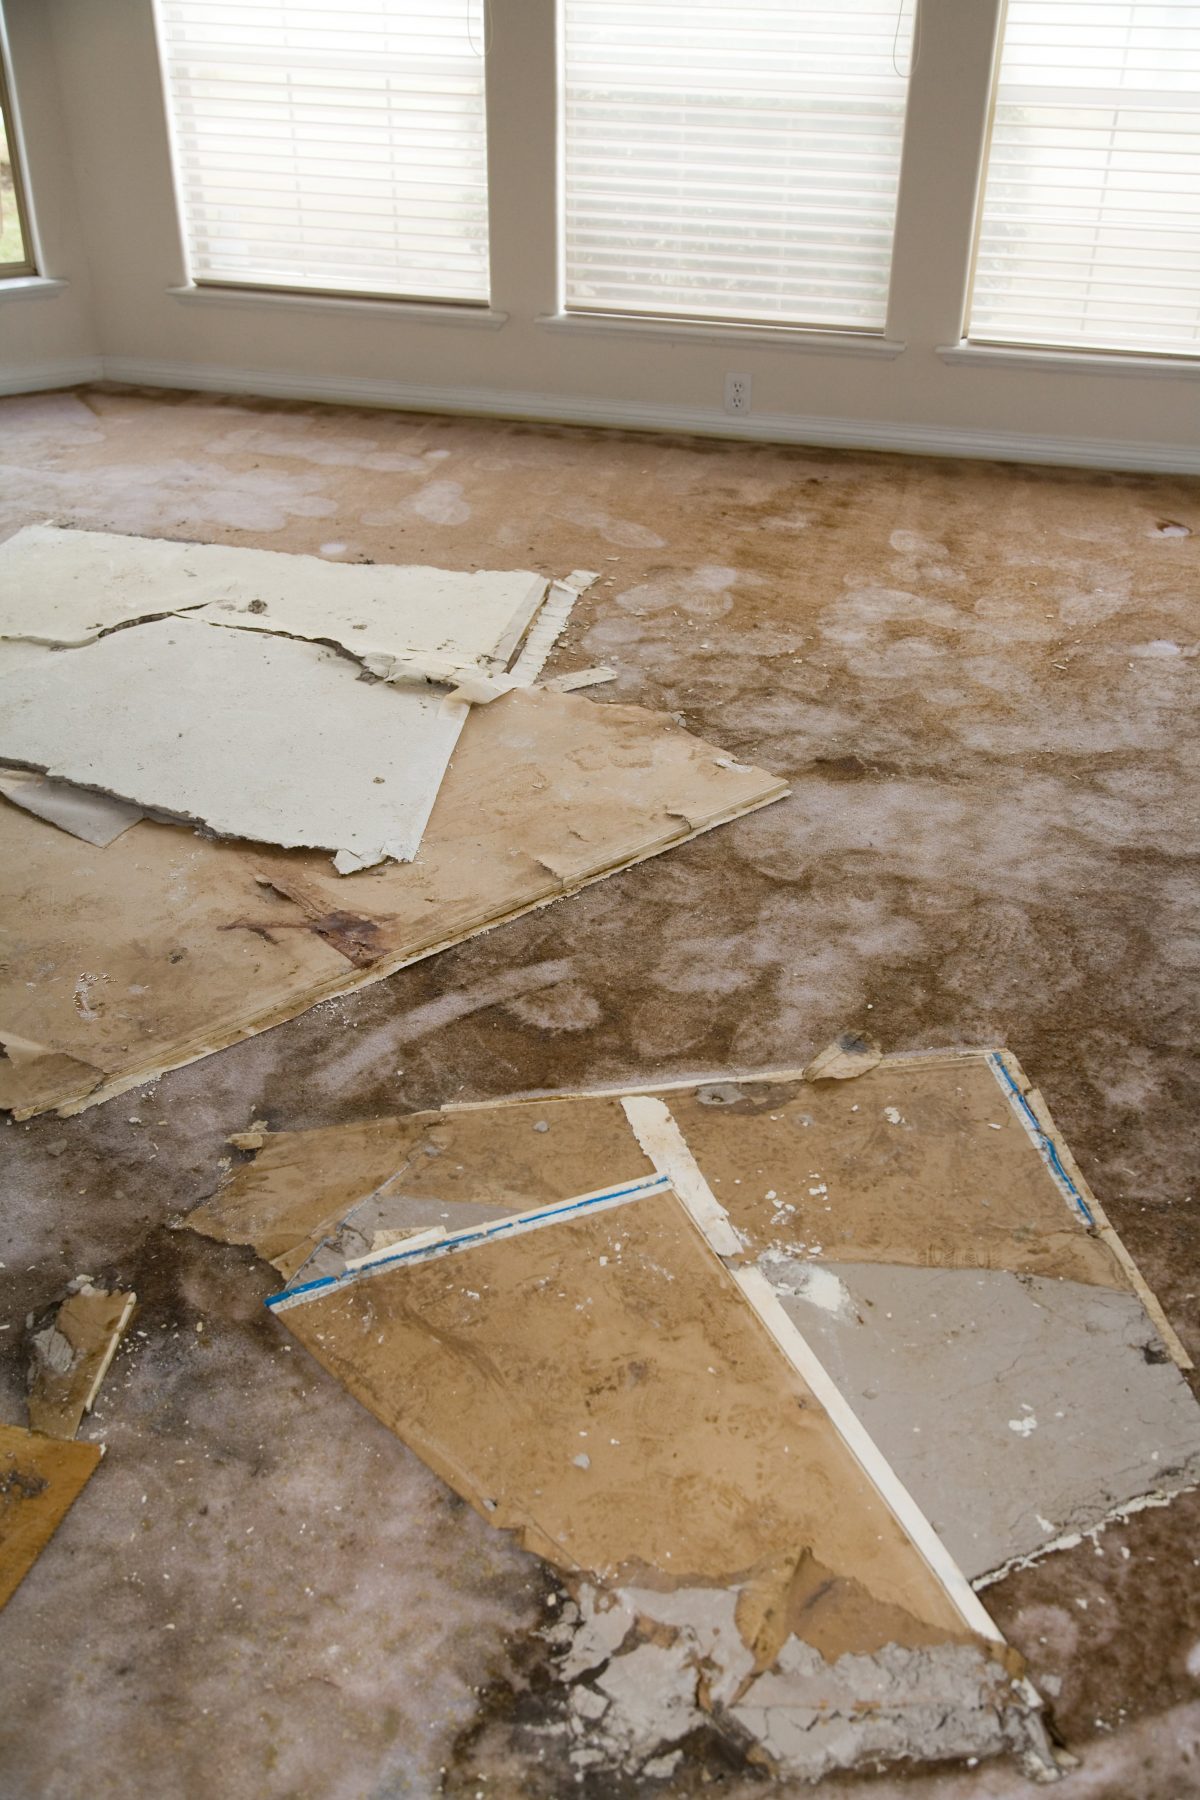 The Dos and the Don’ts of Dealing With Water Damage